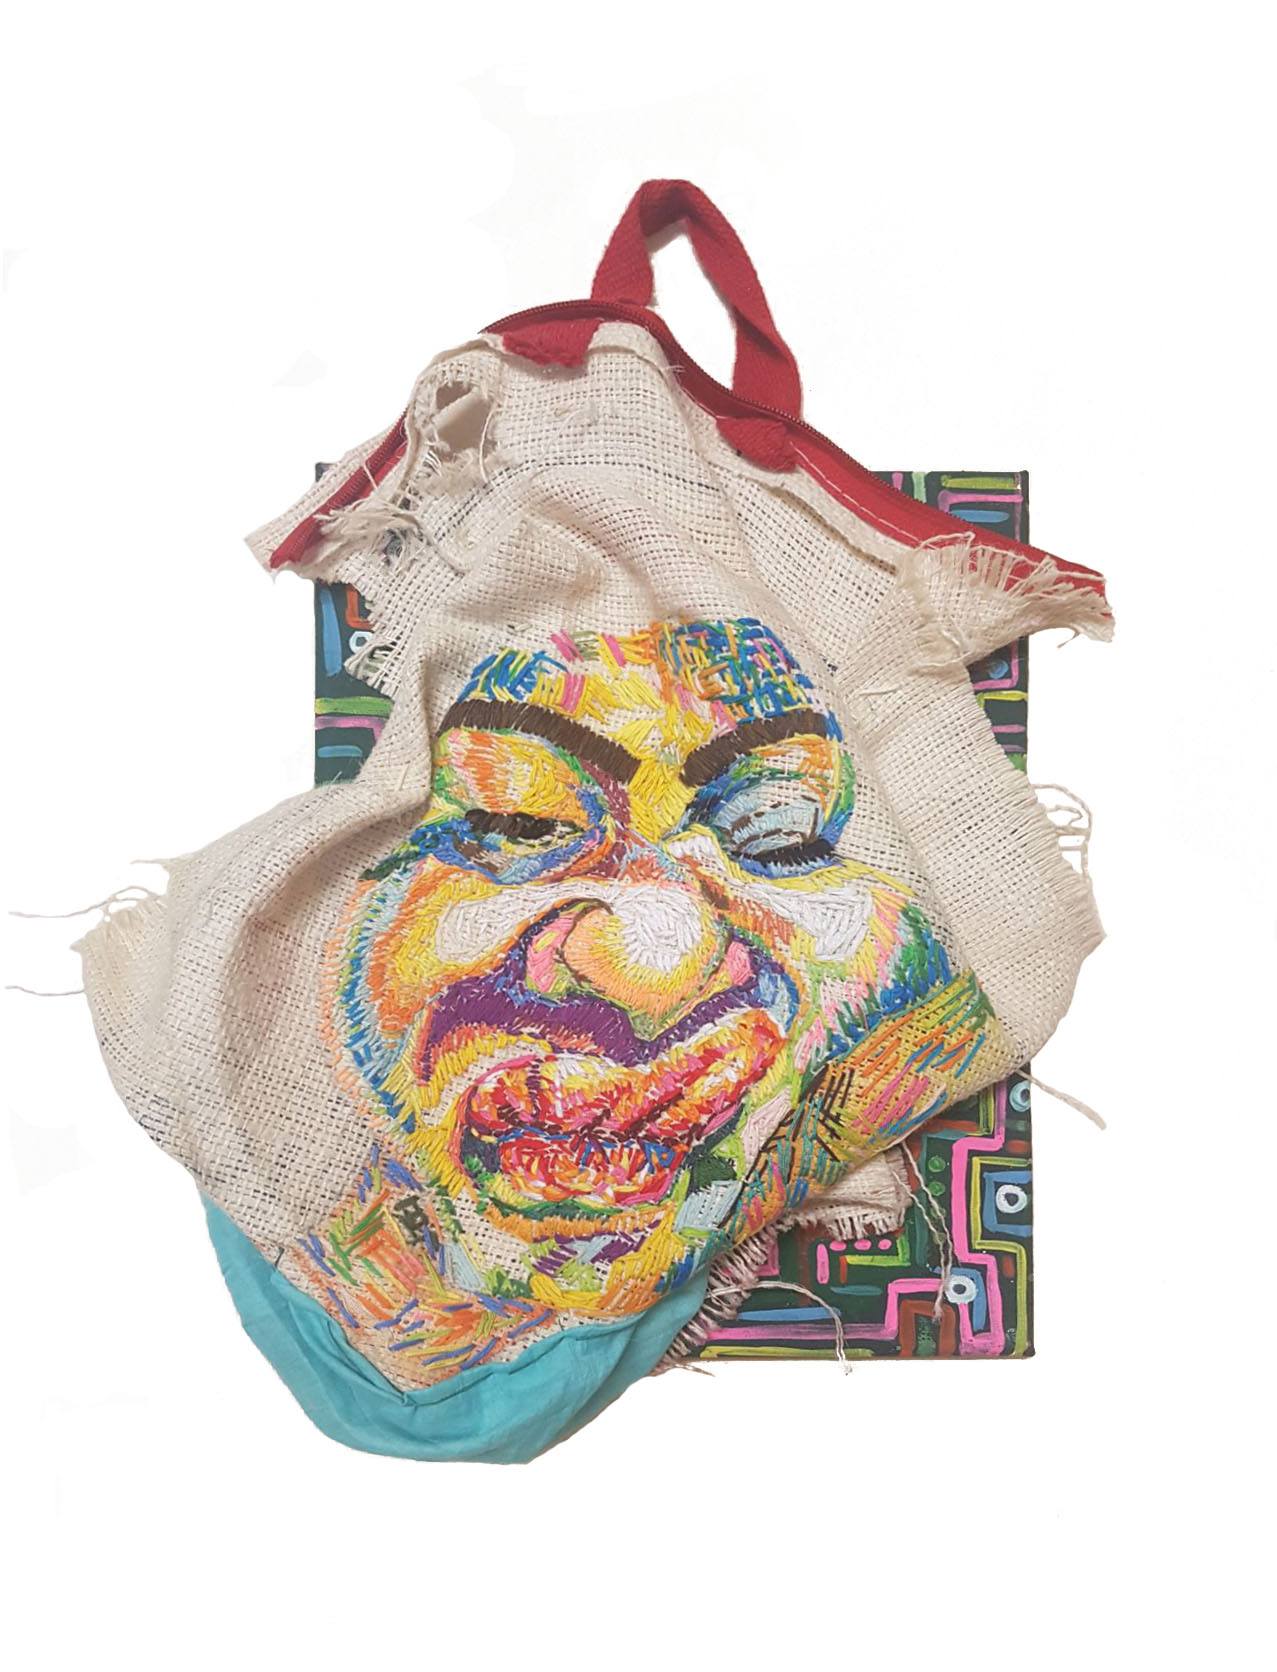 A tote bag with an embroidered face